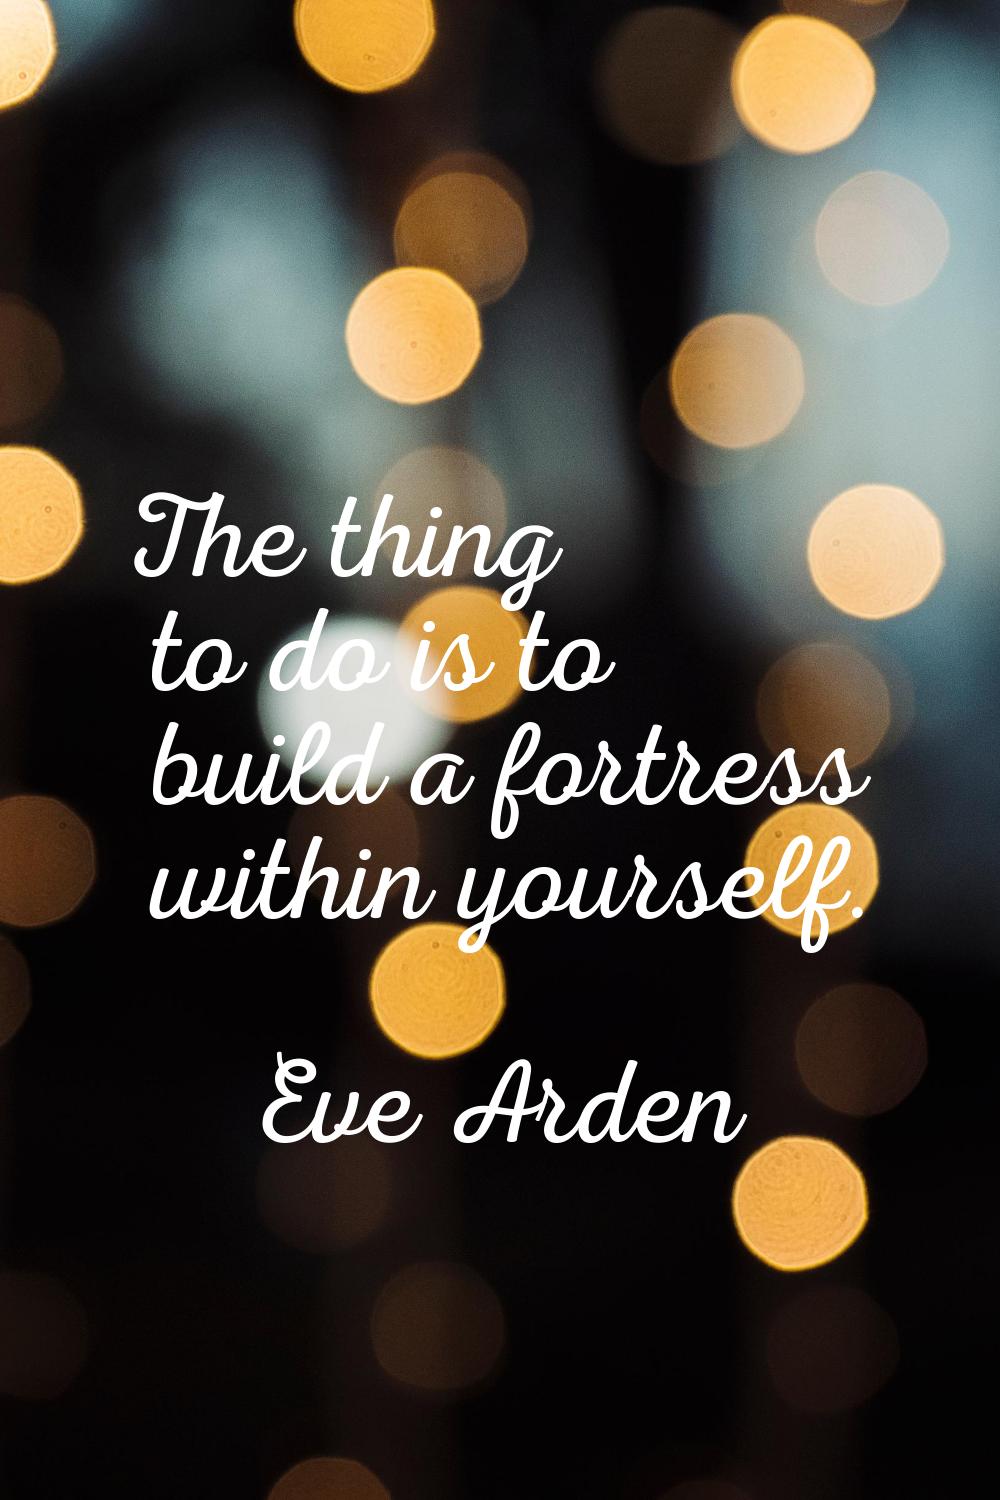 The thing to do is to build a fortress within yourself.